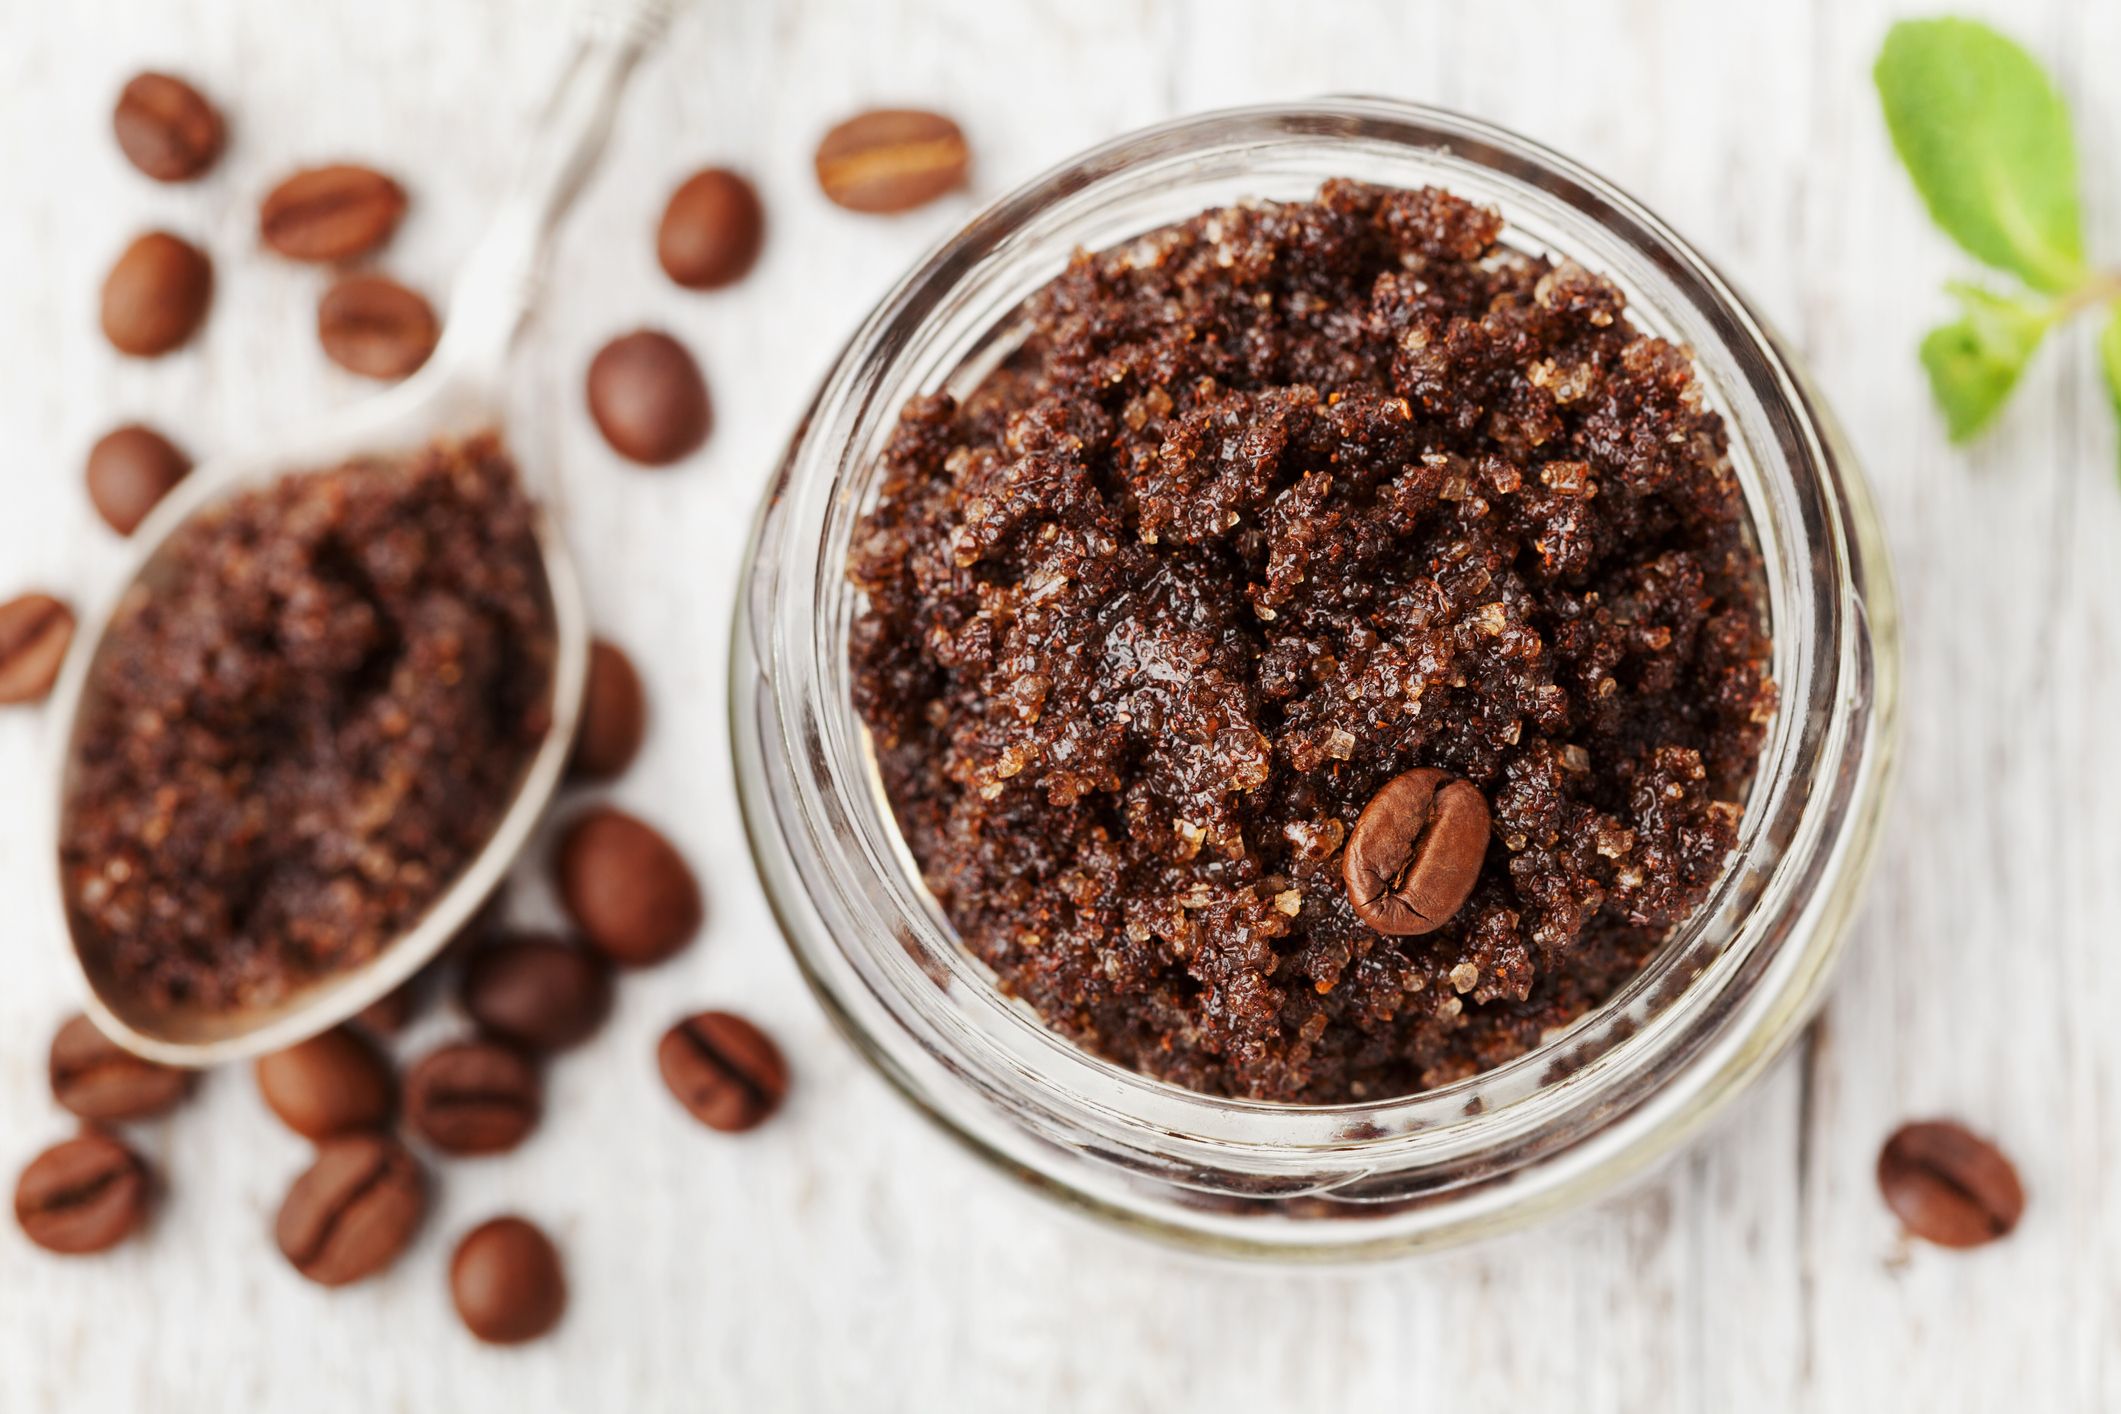 How to Make a DIY Coffee Face Scrub picture